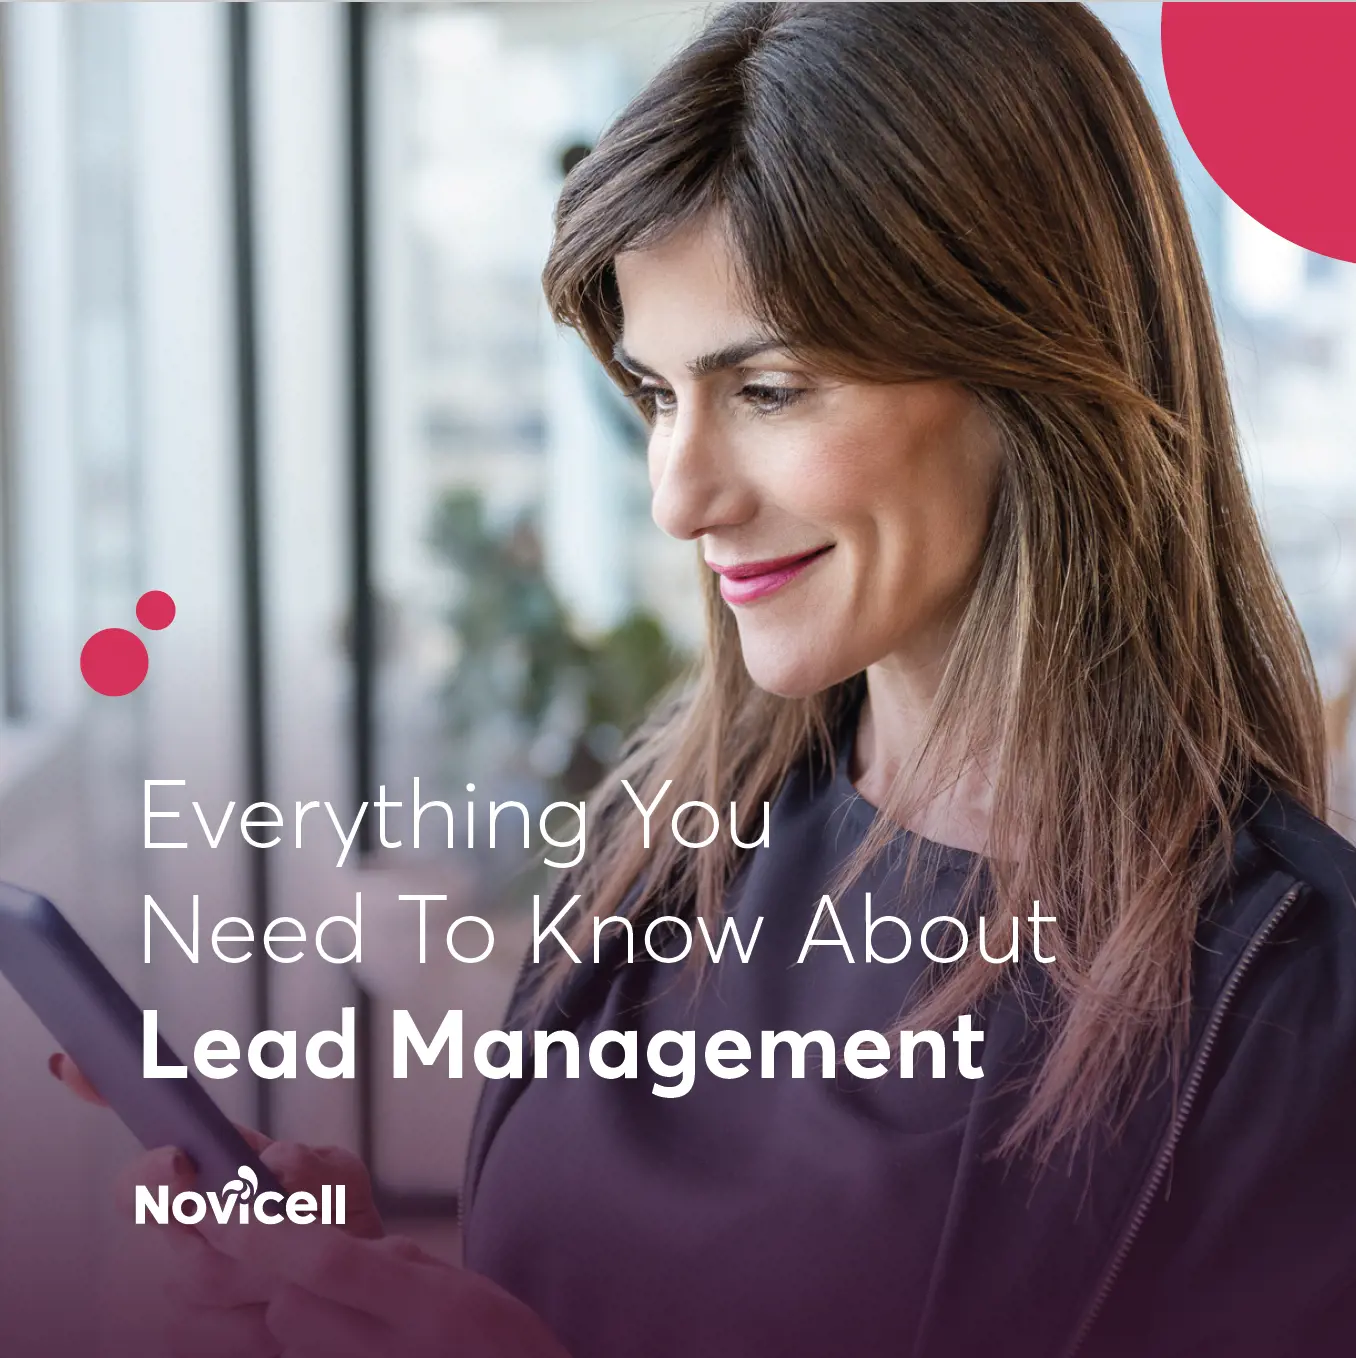 lead management banner with woman smiling at her mobile phone screen 